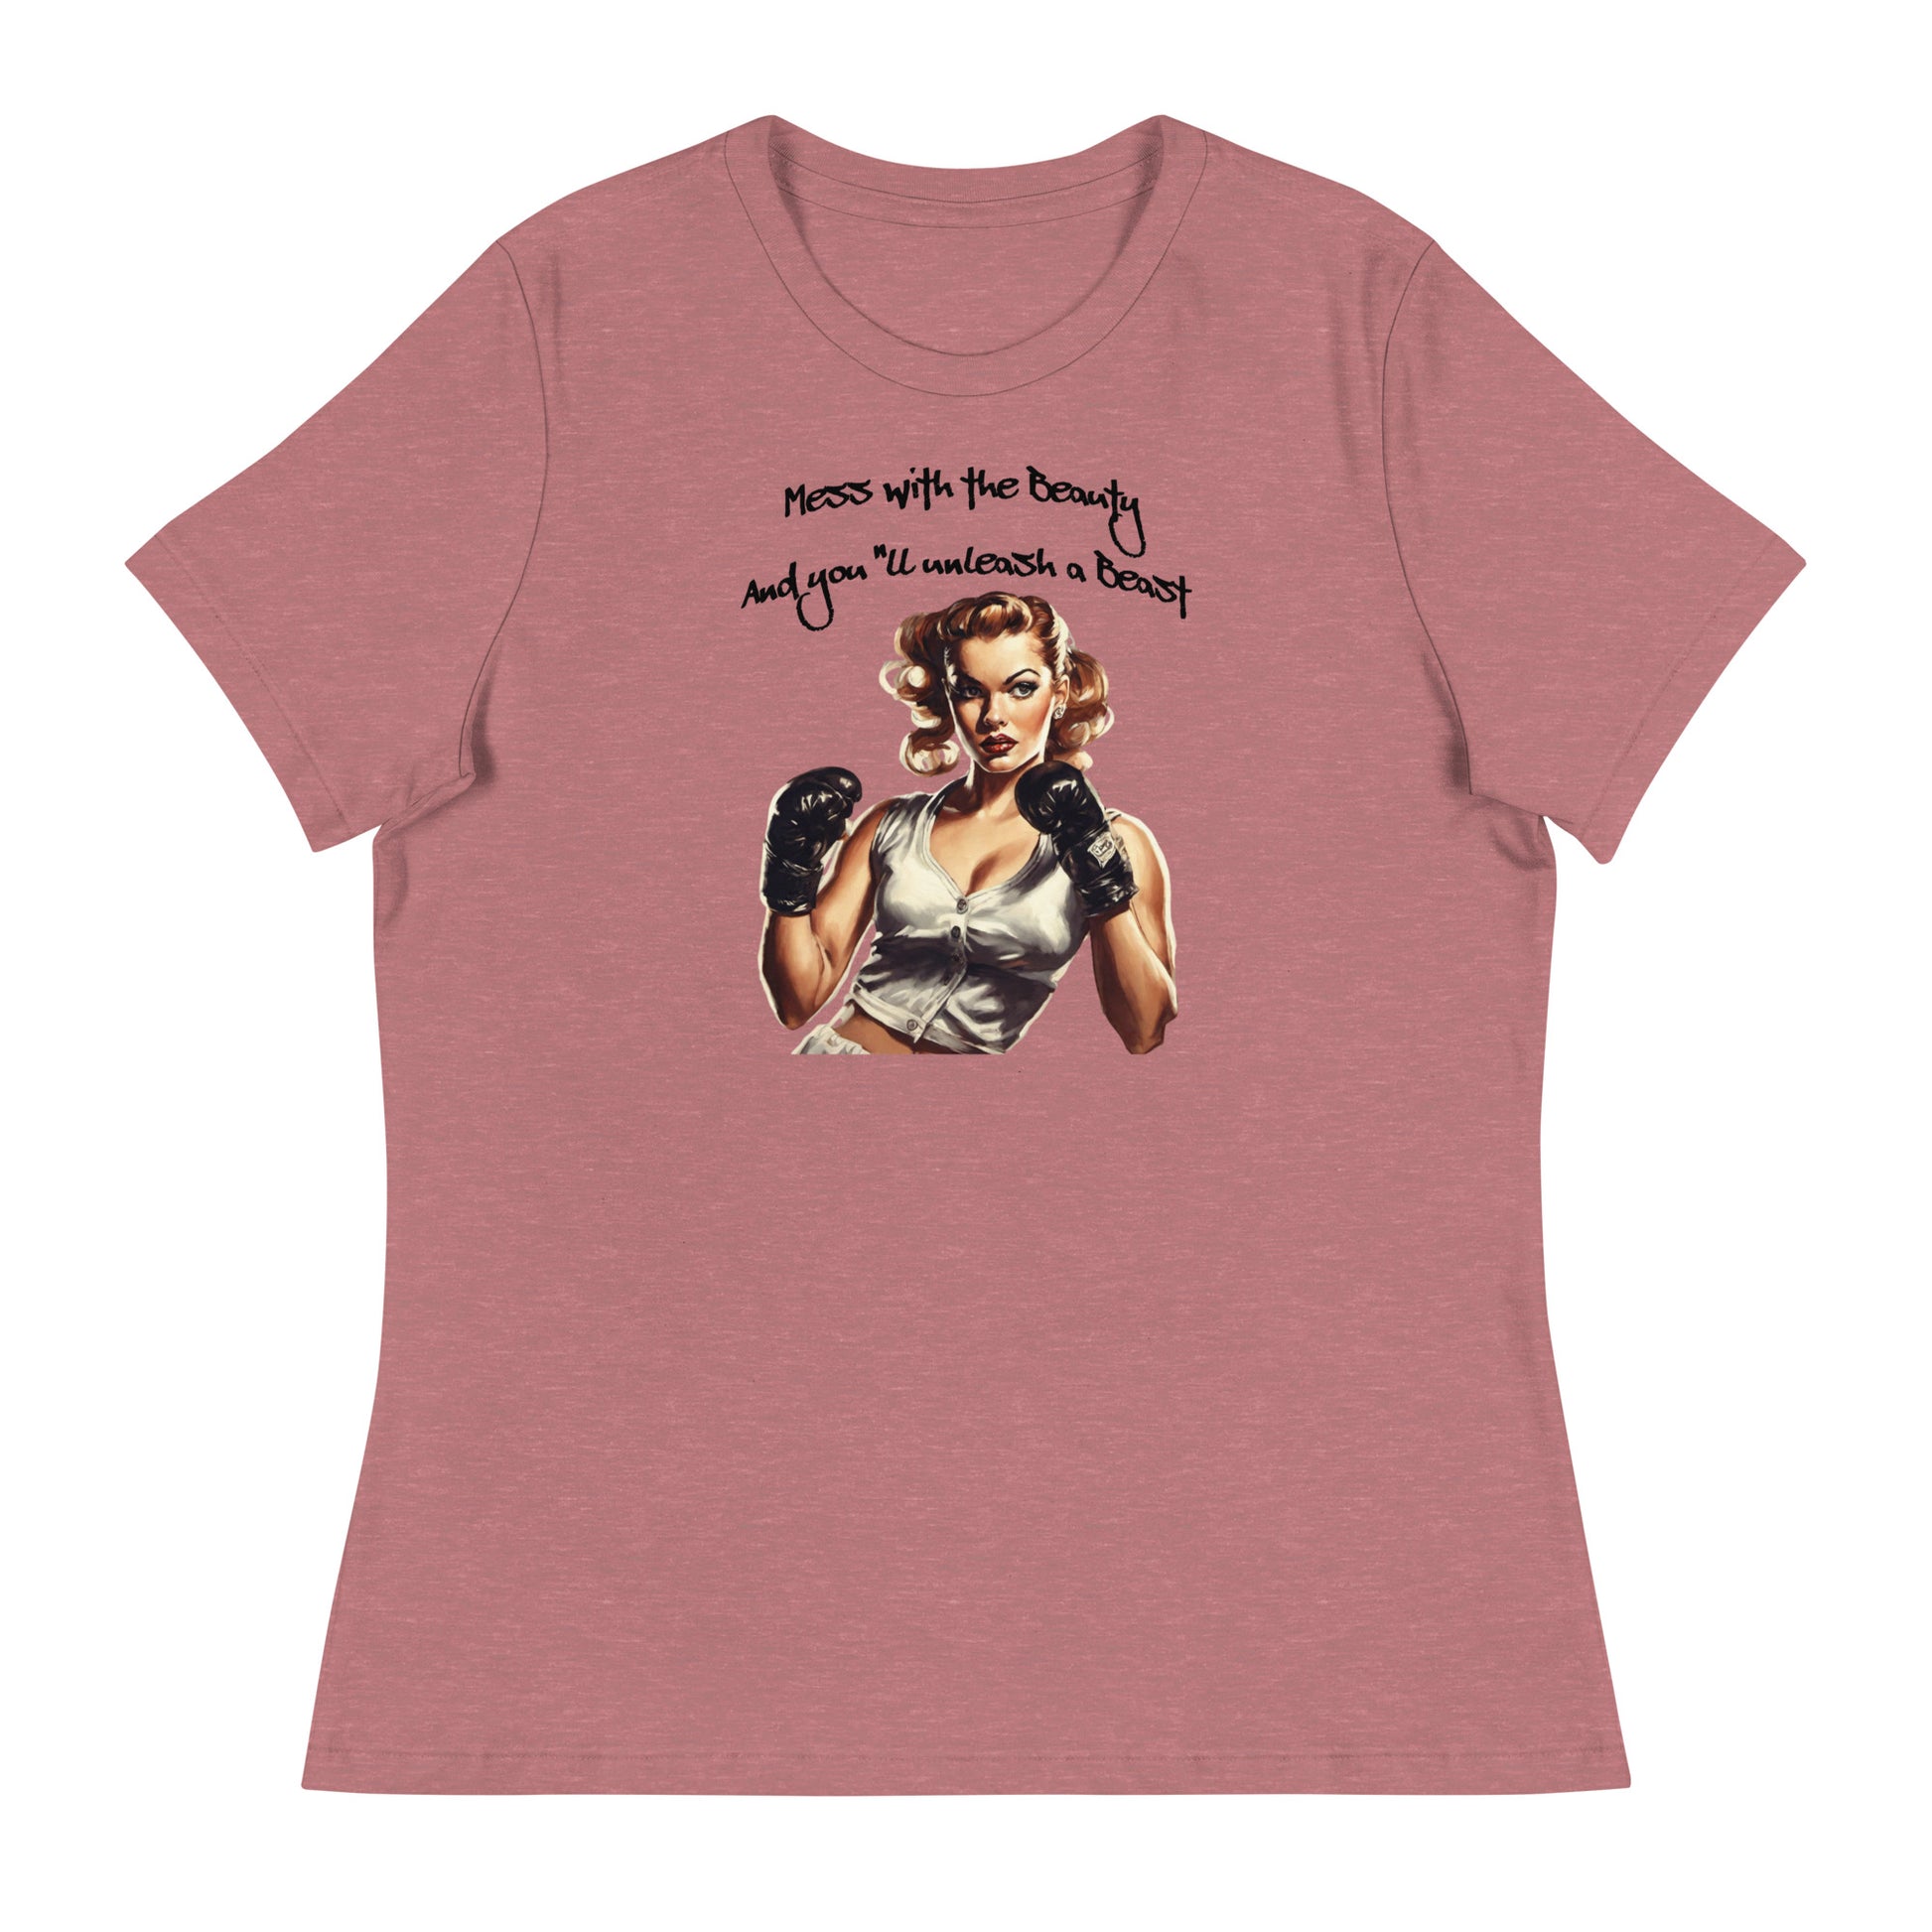 Mess with the Beauty, Unleash the Beast Women's Strength T-Shirt Heather Mauve